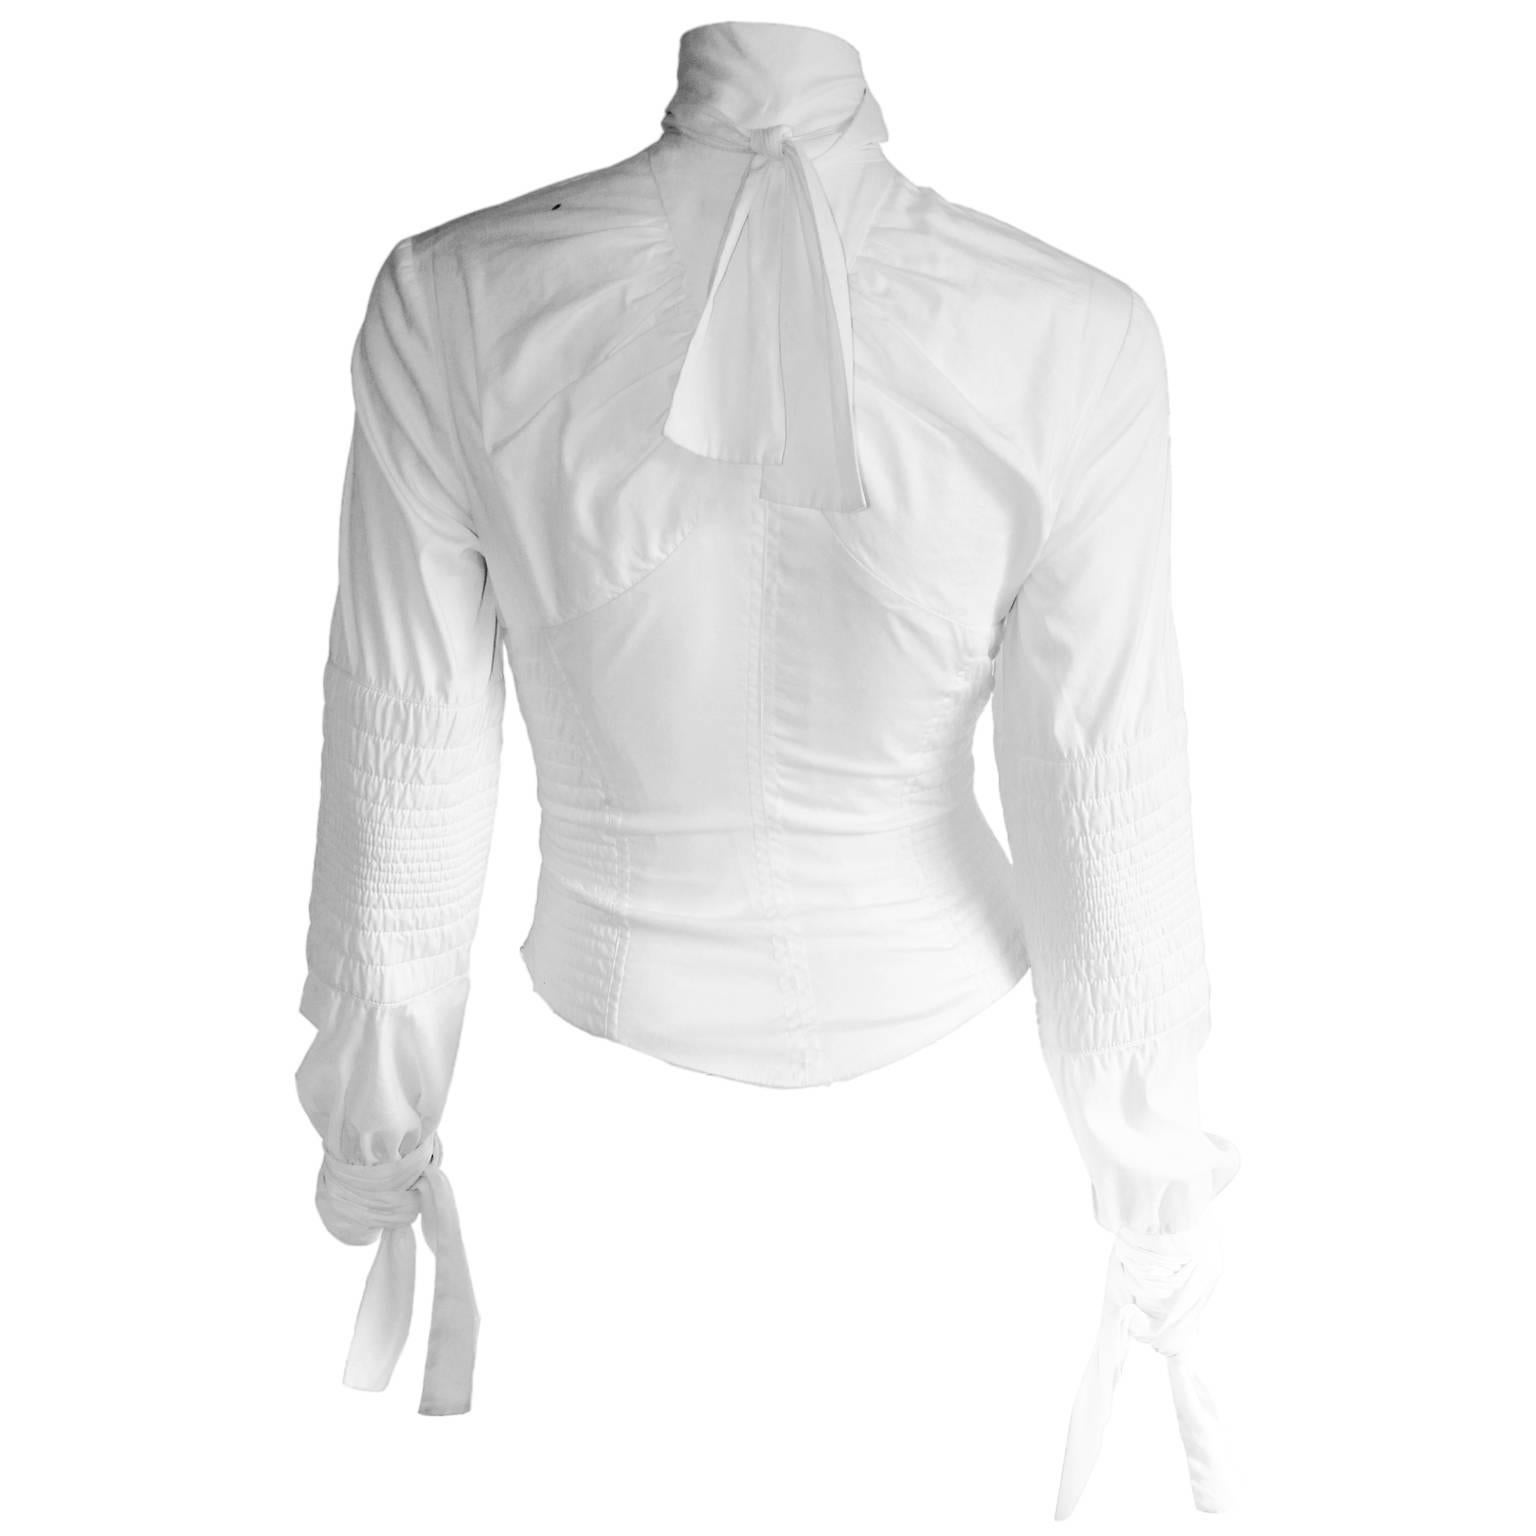 The Most Heavenly Tom Ford Gucci Fall Winter 2003 Collection White Corseted LS Blouse In Italian Size 40!

Considered by many to be his greatest collection of all, Tom Ford's fall winter 2003 runway collection for Gucci was simply awash with the